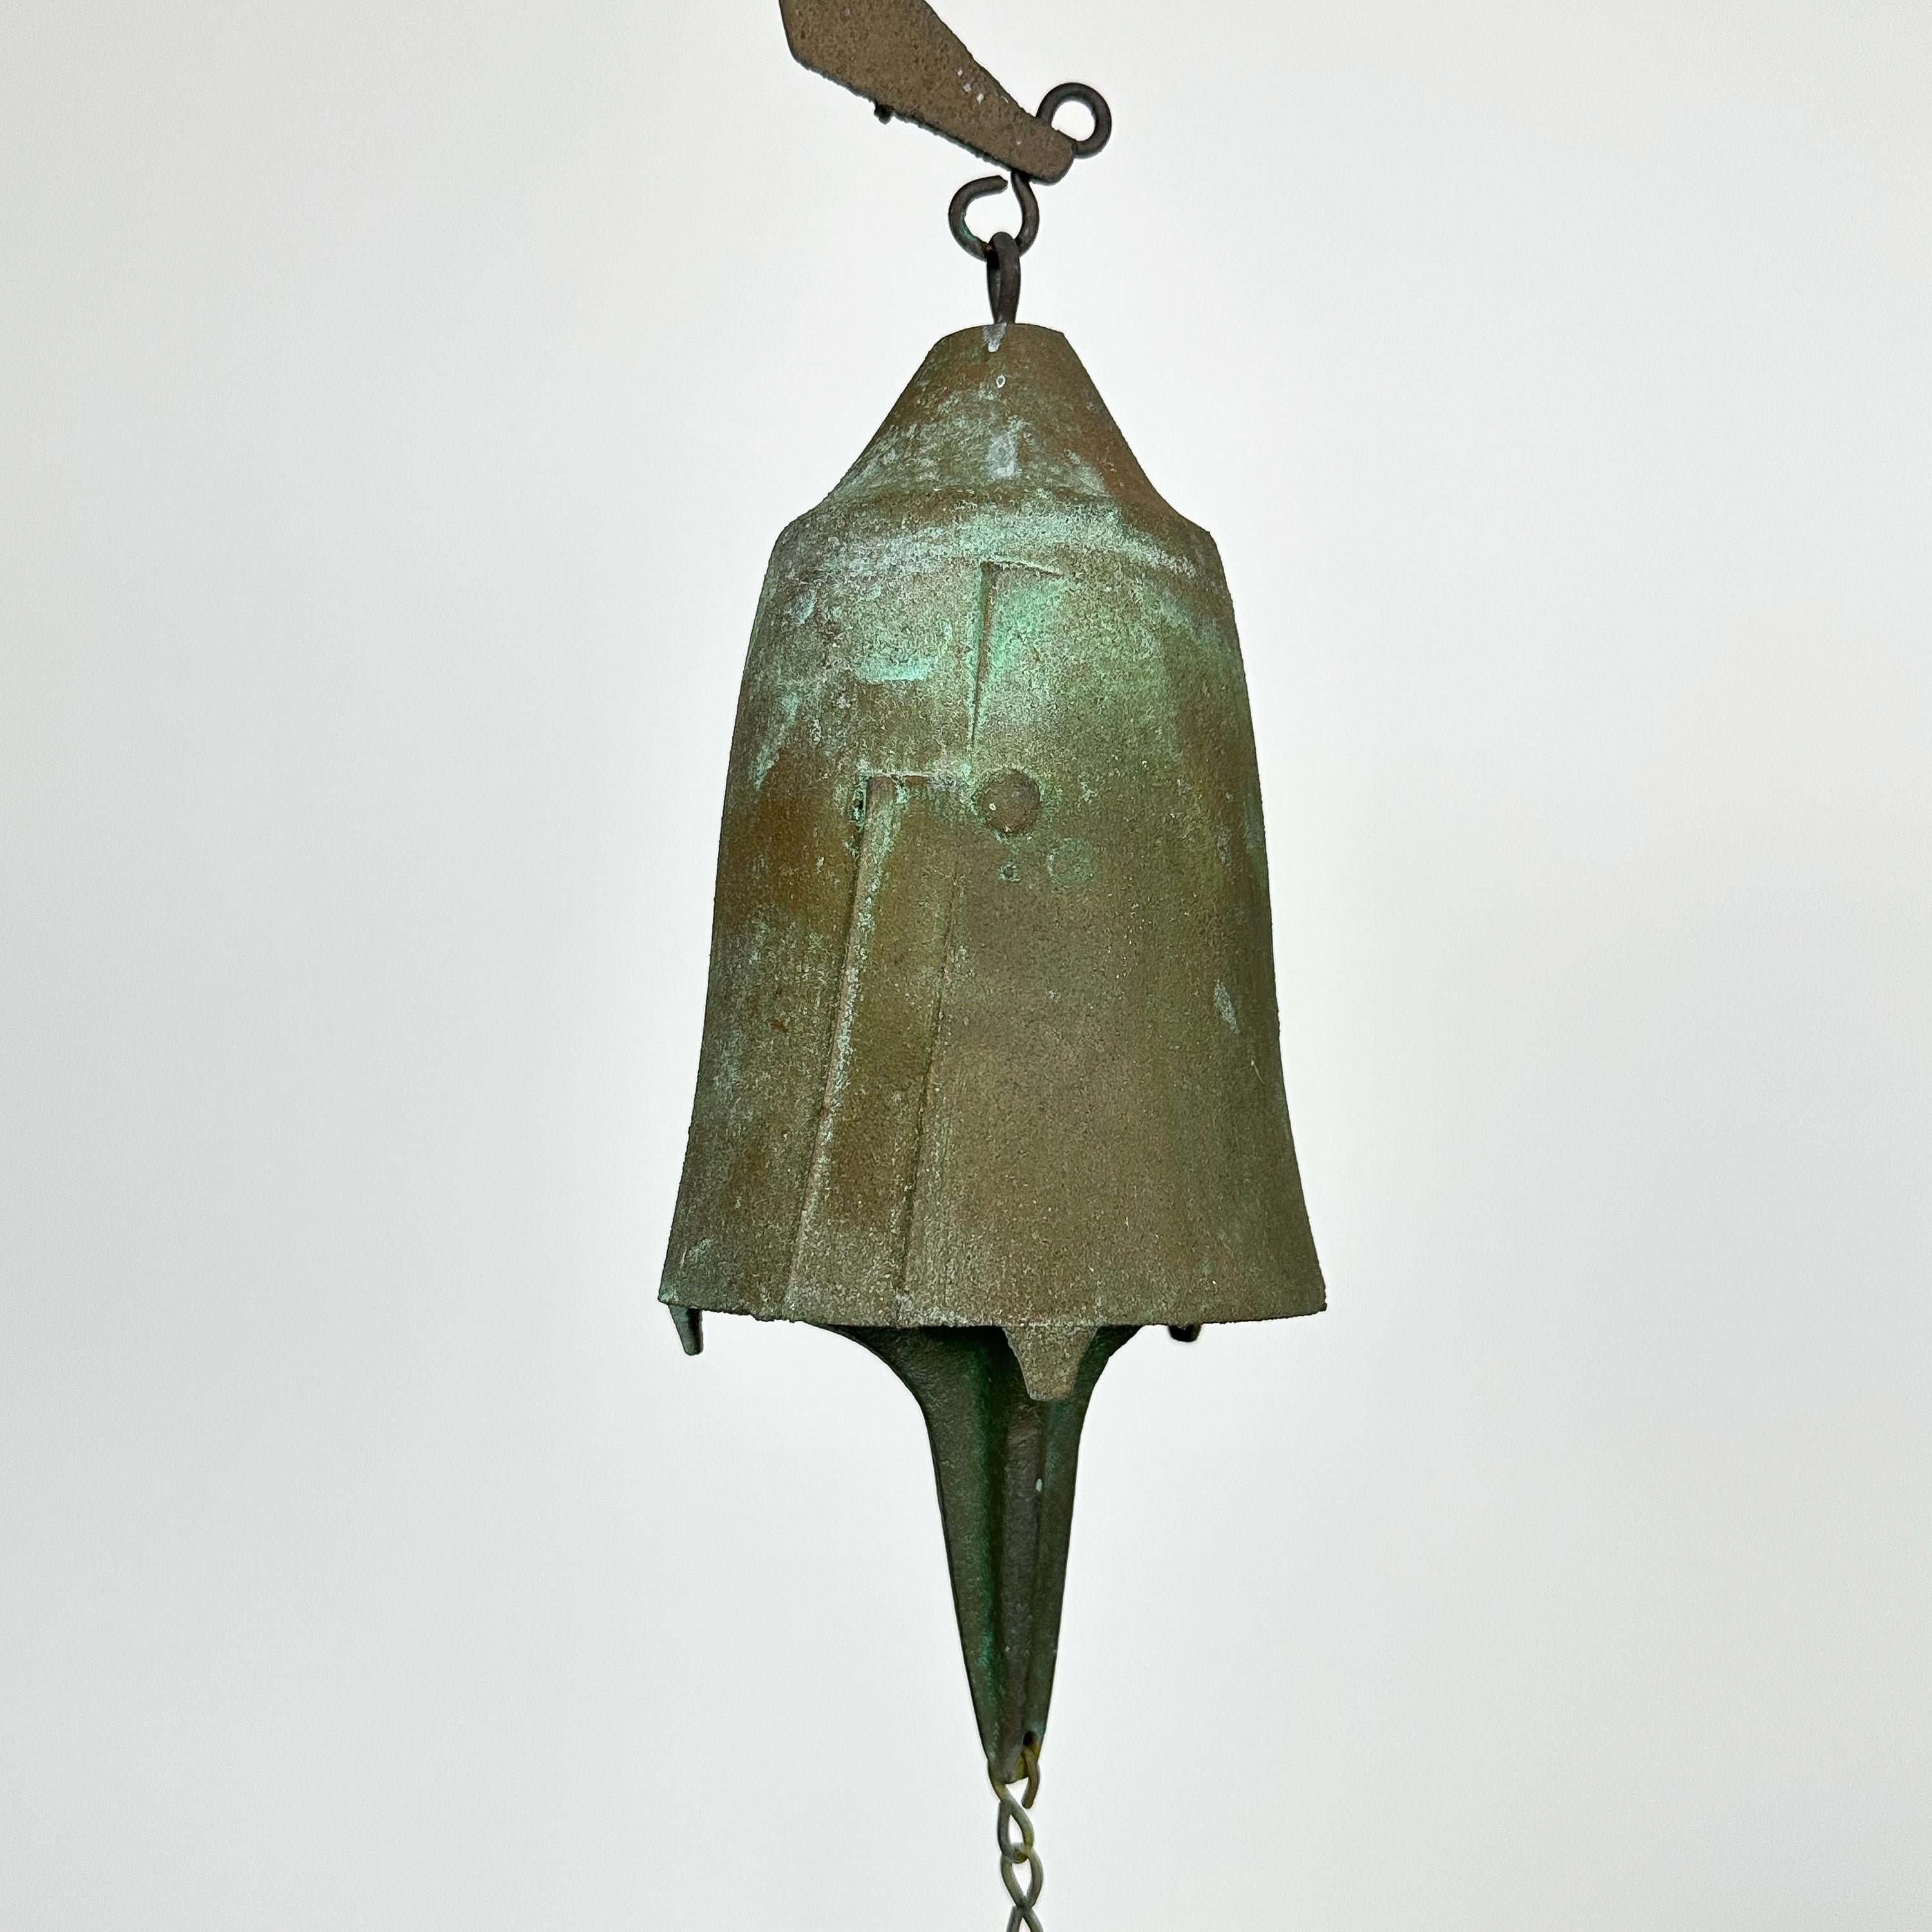 American Mid-Century Bronze Bell / Wind Chime by Paolo Soleri for Arcosanti 